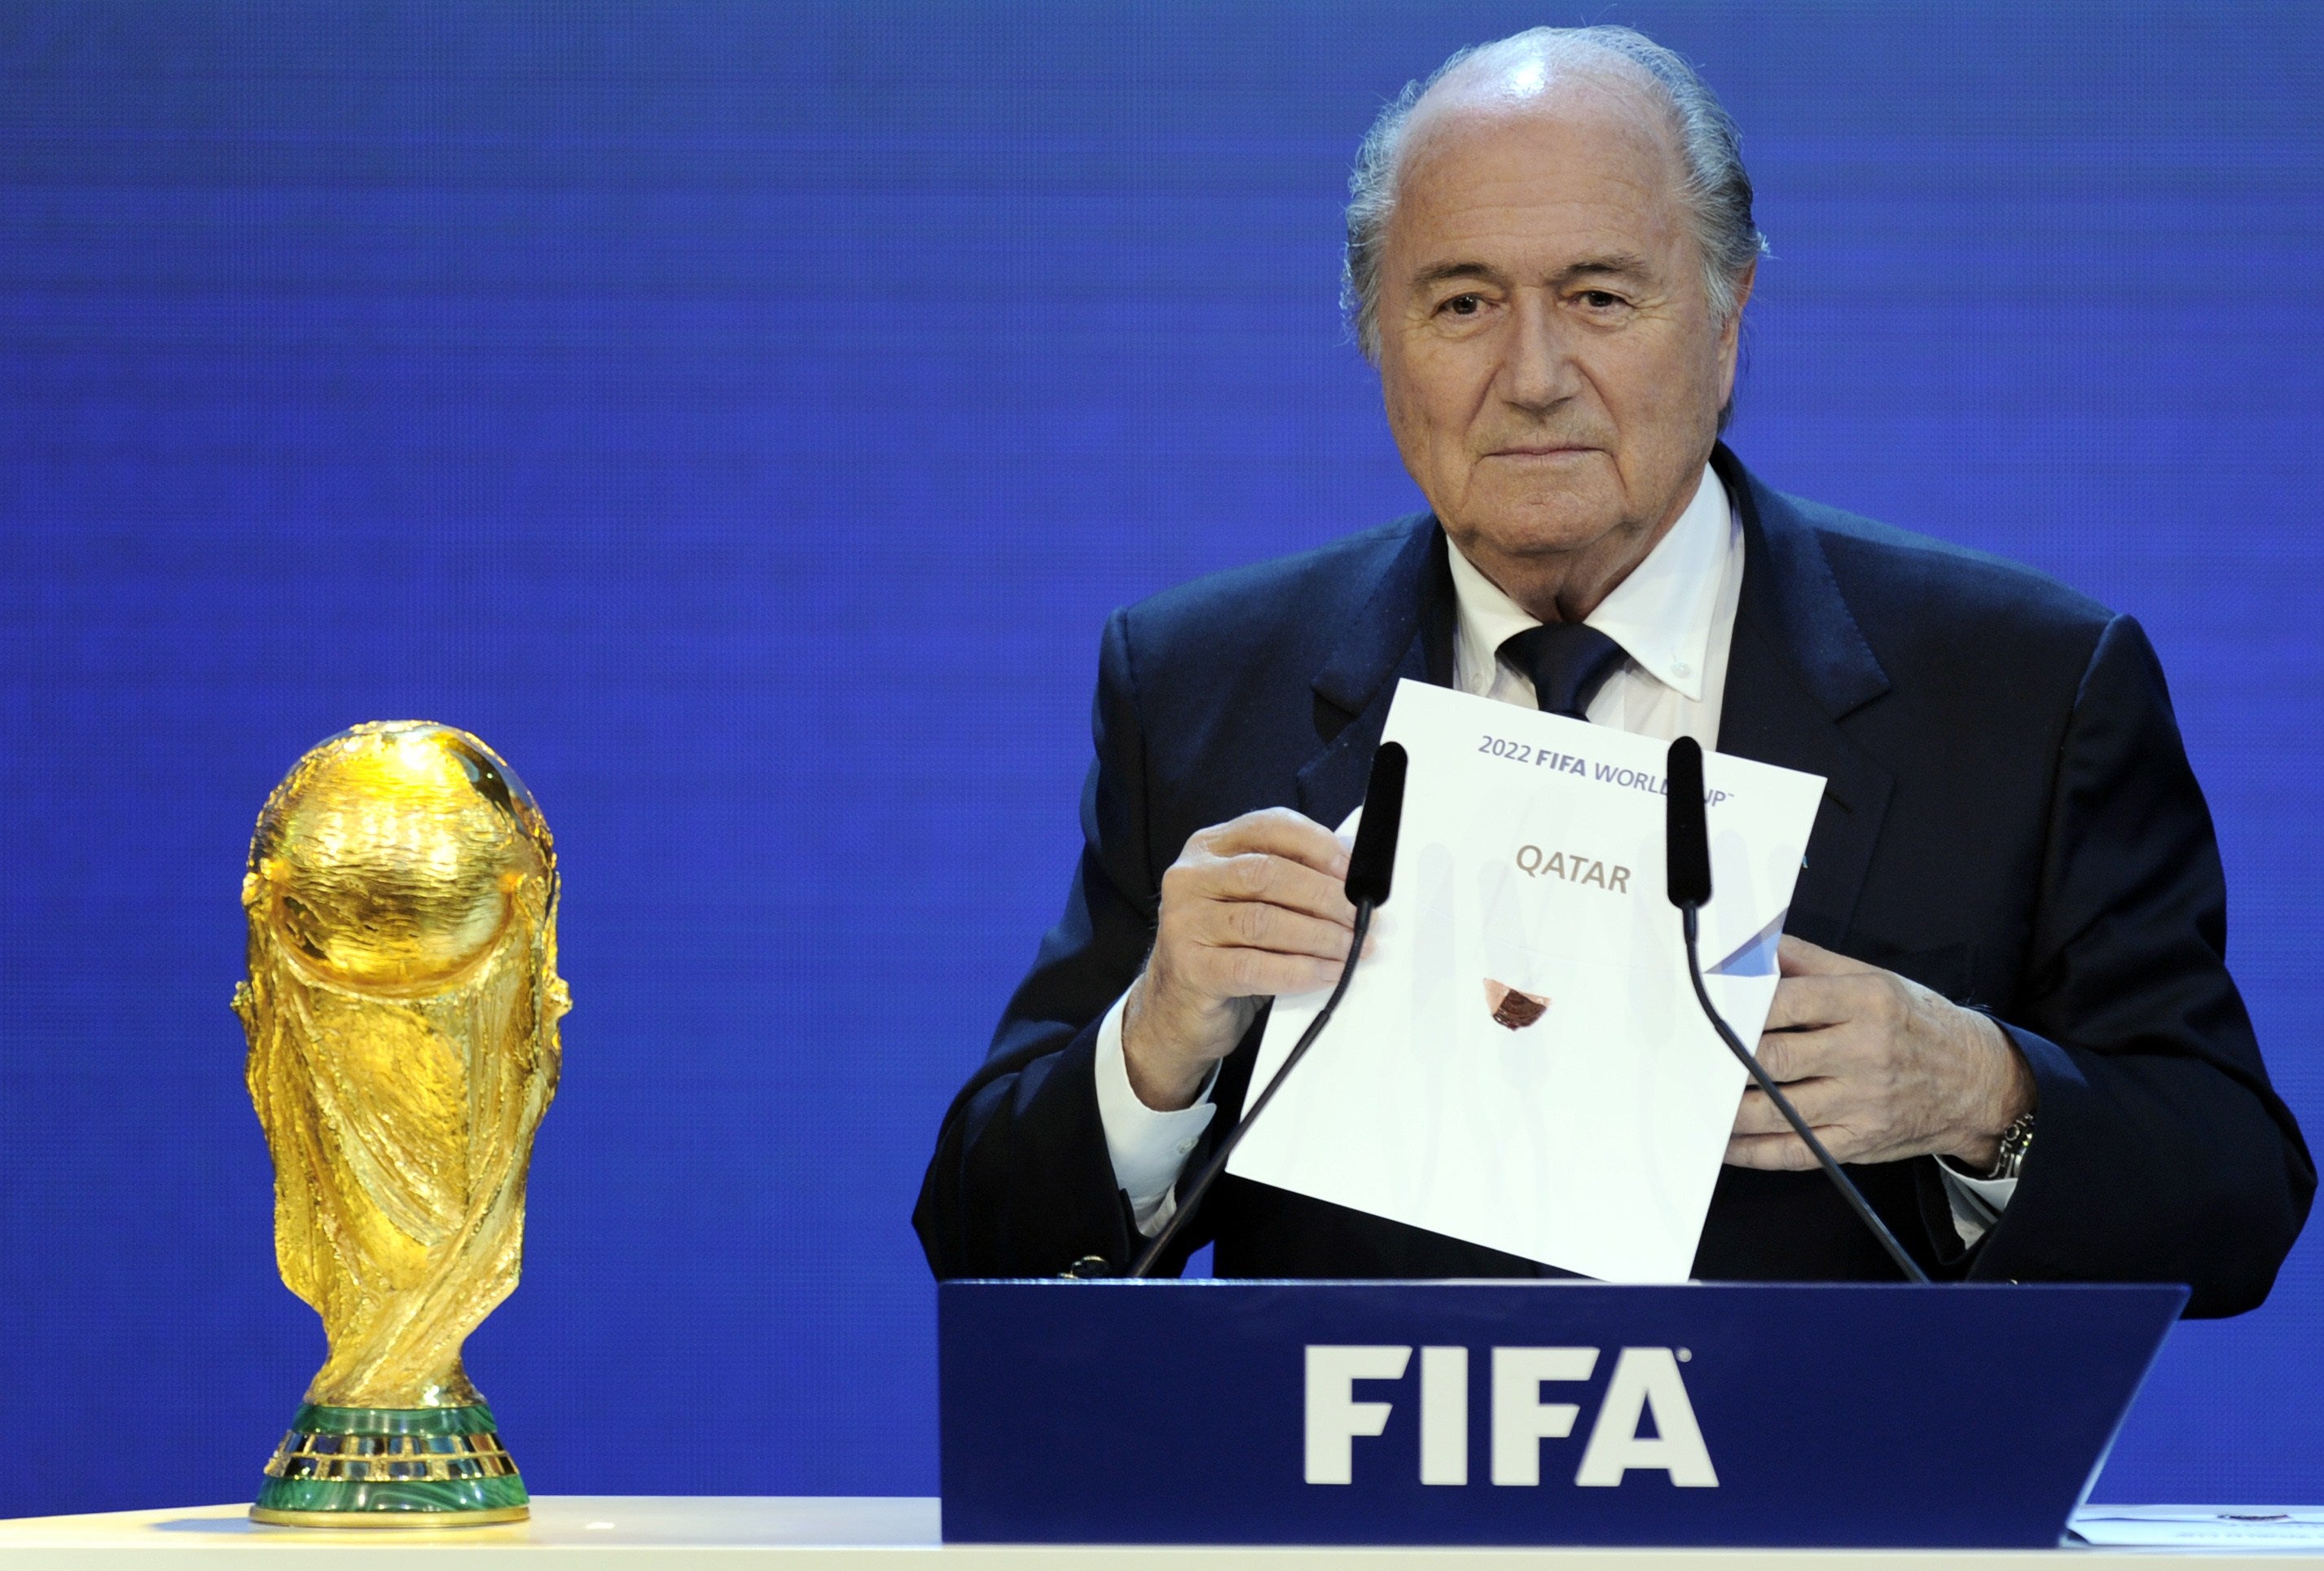 Qatar won the bid for the World Cup back in 2010, sparking intense scrutiny of the voting process headed by Blatter